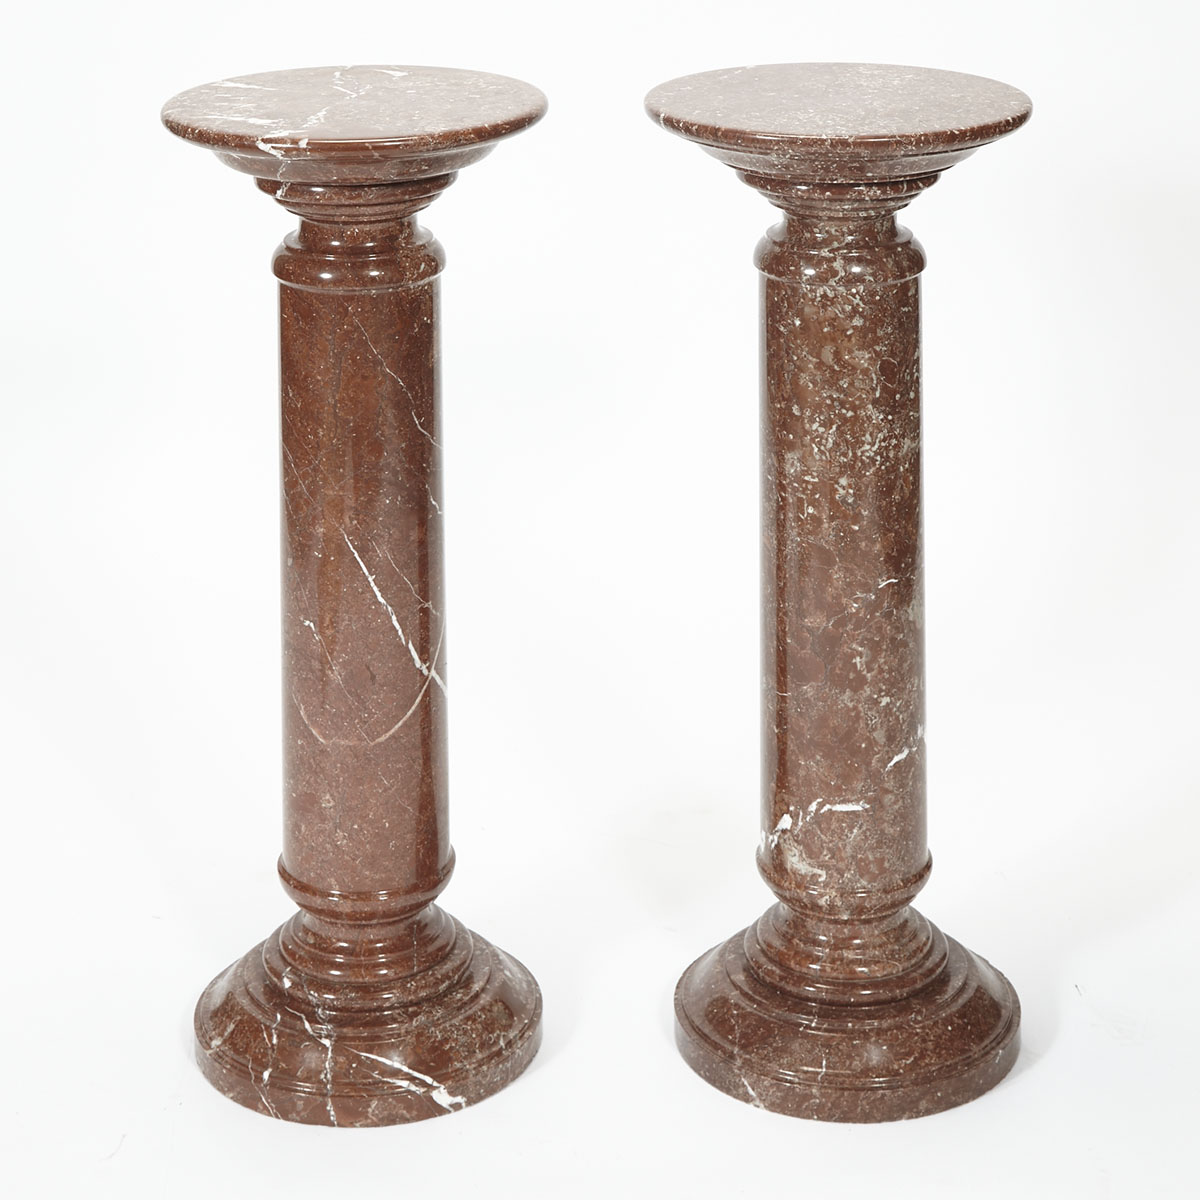 Pair of Turned Red Marble Column Form Pedestals, 20th century